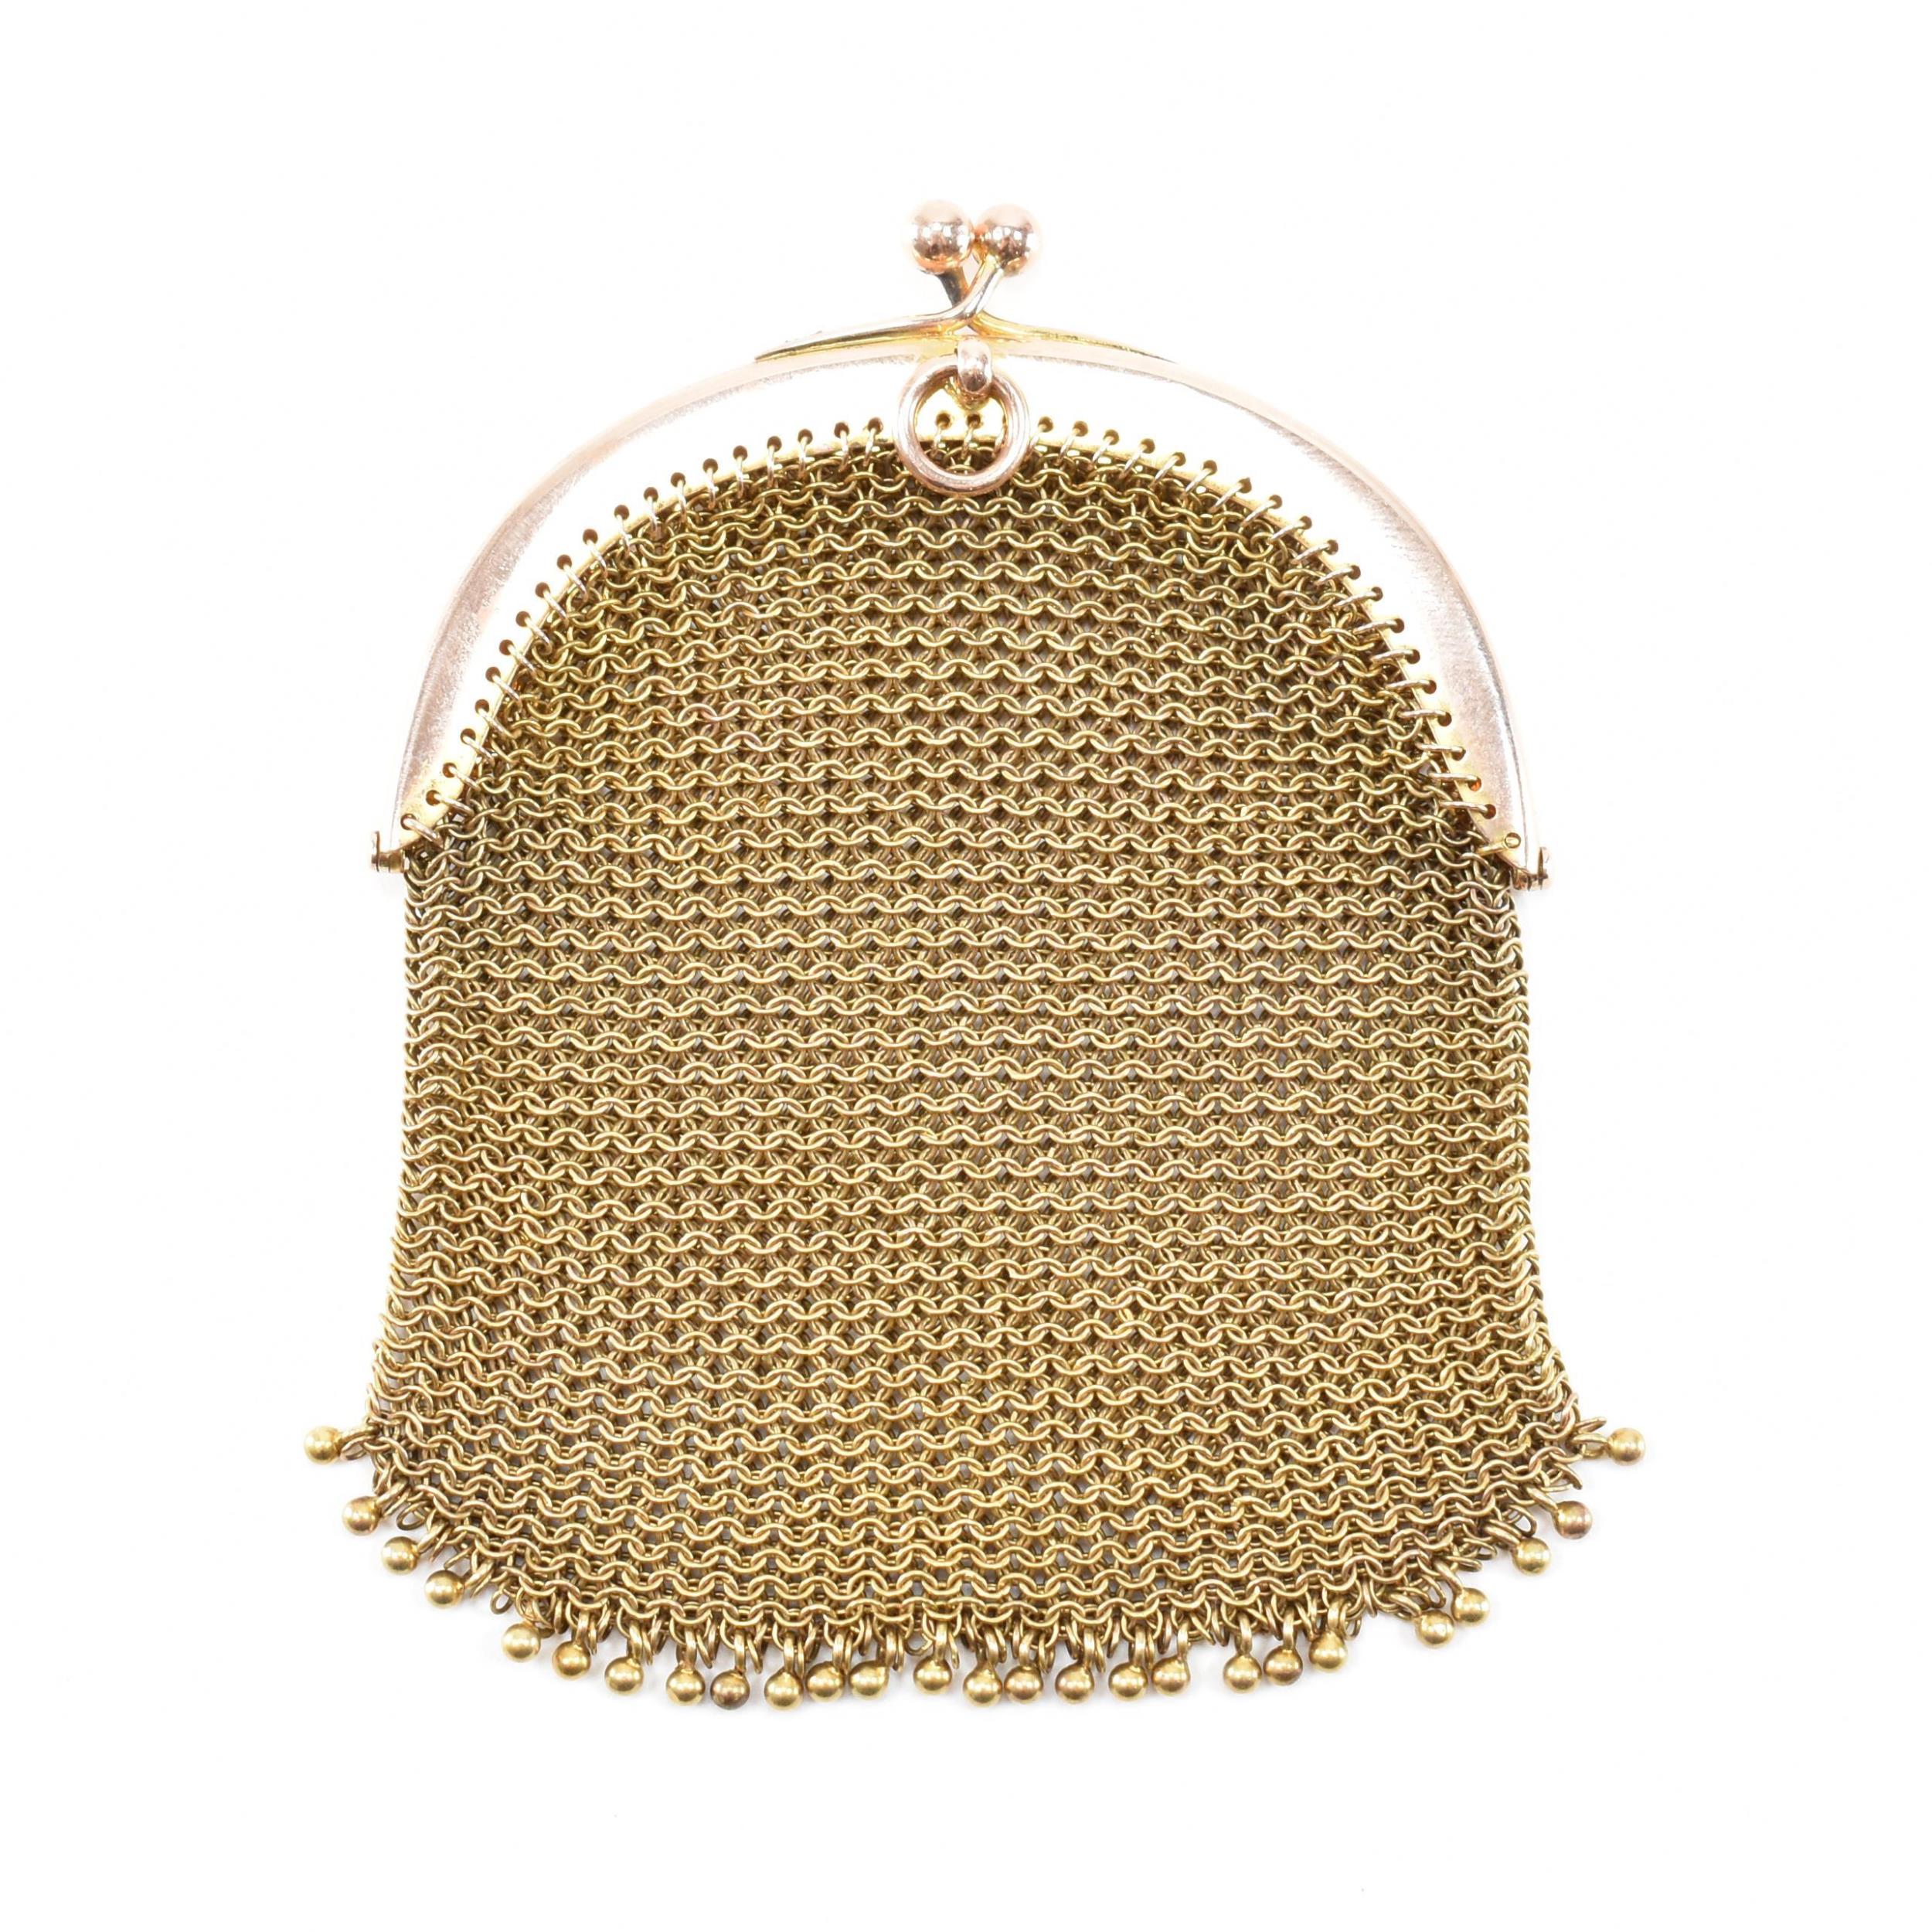 VINTAGE GOLD SOVEREIGN MESH PURSE - Image 2 of 6